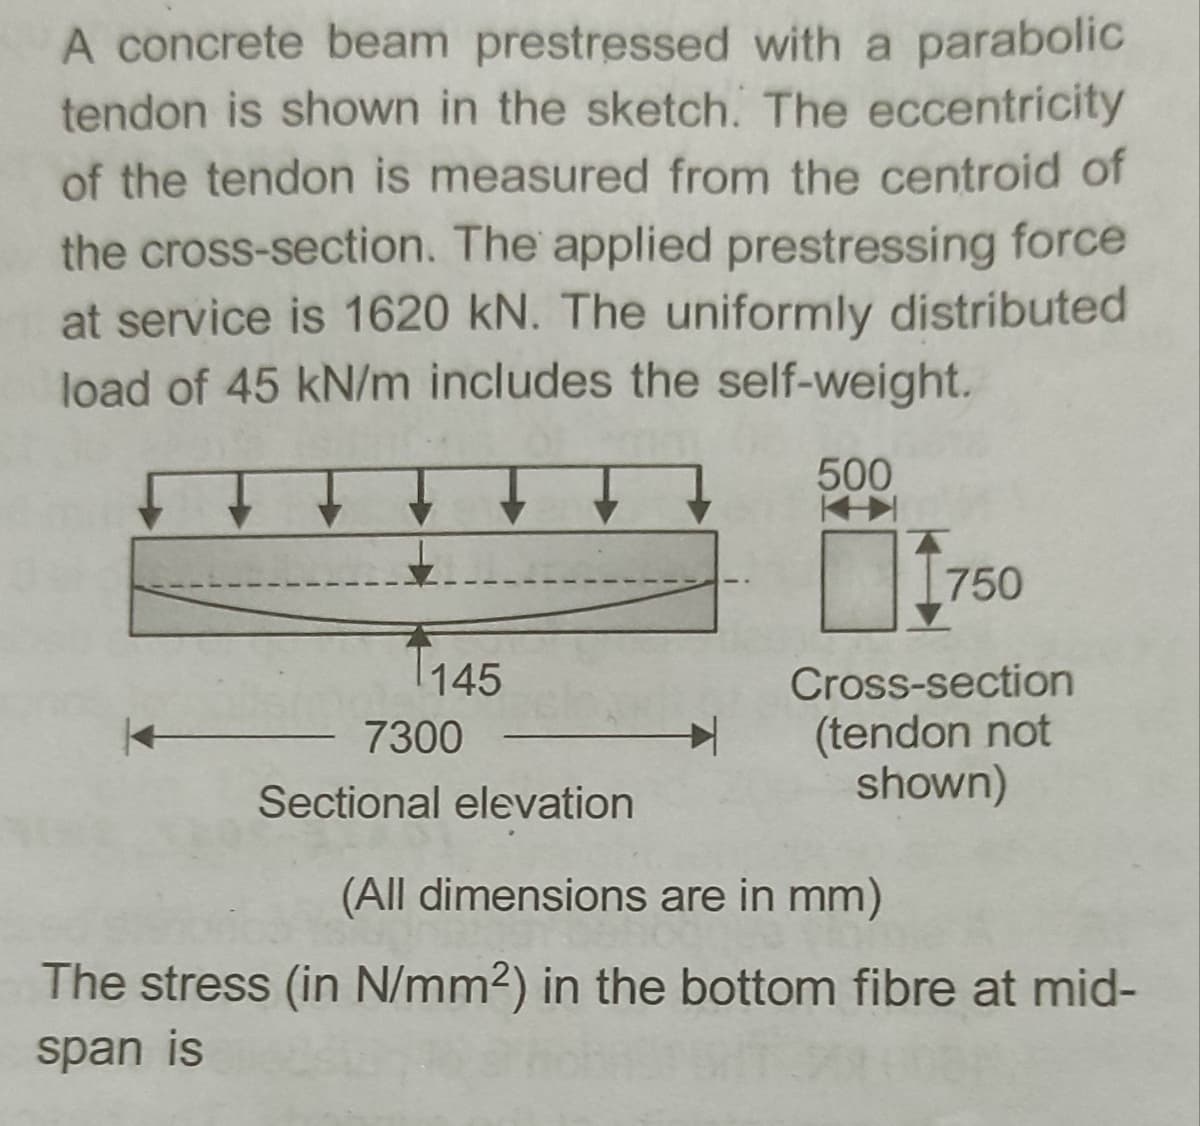 A concrete beam prestressed with a parabolic
tendon is shown in the sketch. The eccentricity
of the tendon is measured from the centroid of
the cross-section. The applied prestressing force
at service is 1620 kN. The uniformly distributed
load of 45 kN/m includes the self-weight.
500
750
145
Cross-section
(tendon not
shown)
7300
Sectional elevation
(All dimensions are in mm)
The stress (in N/mm2) in the bottom fibre at mid-
span is
